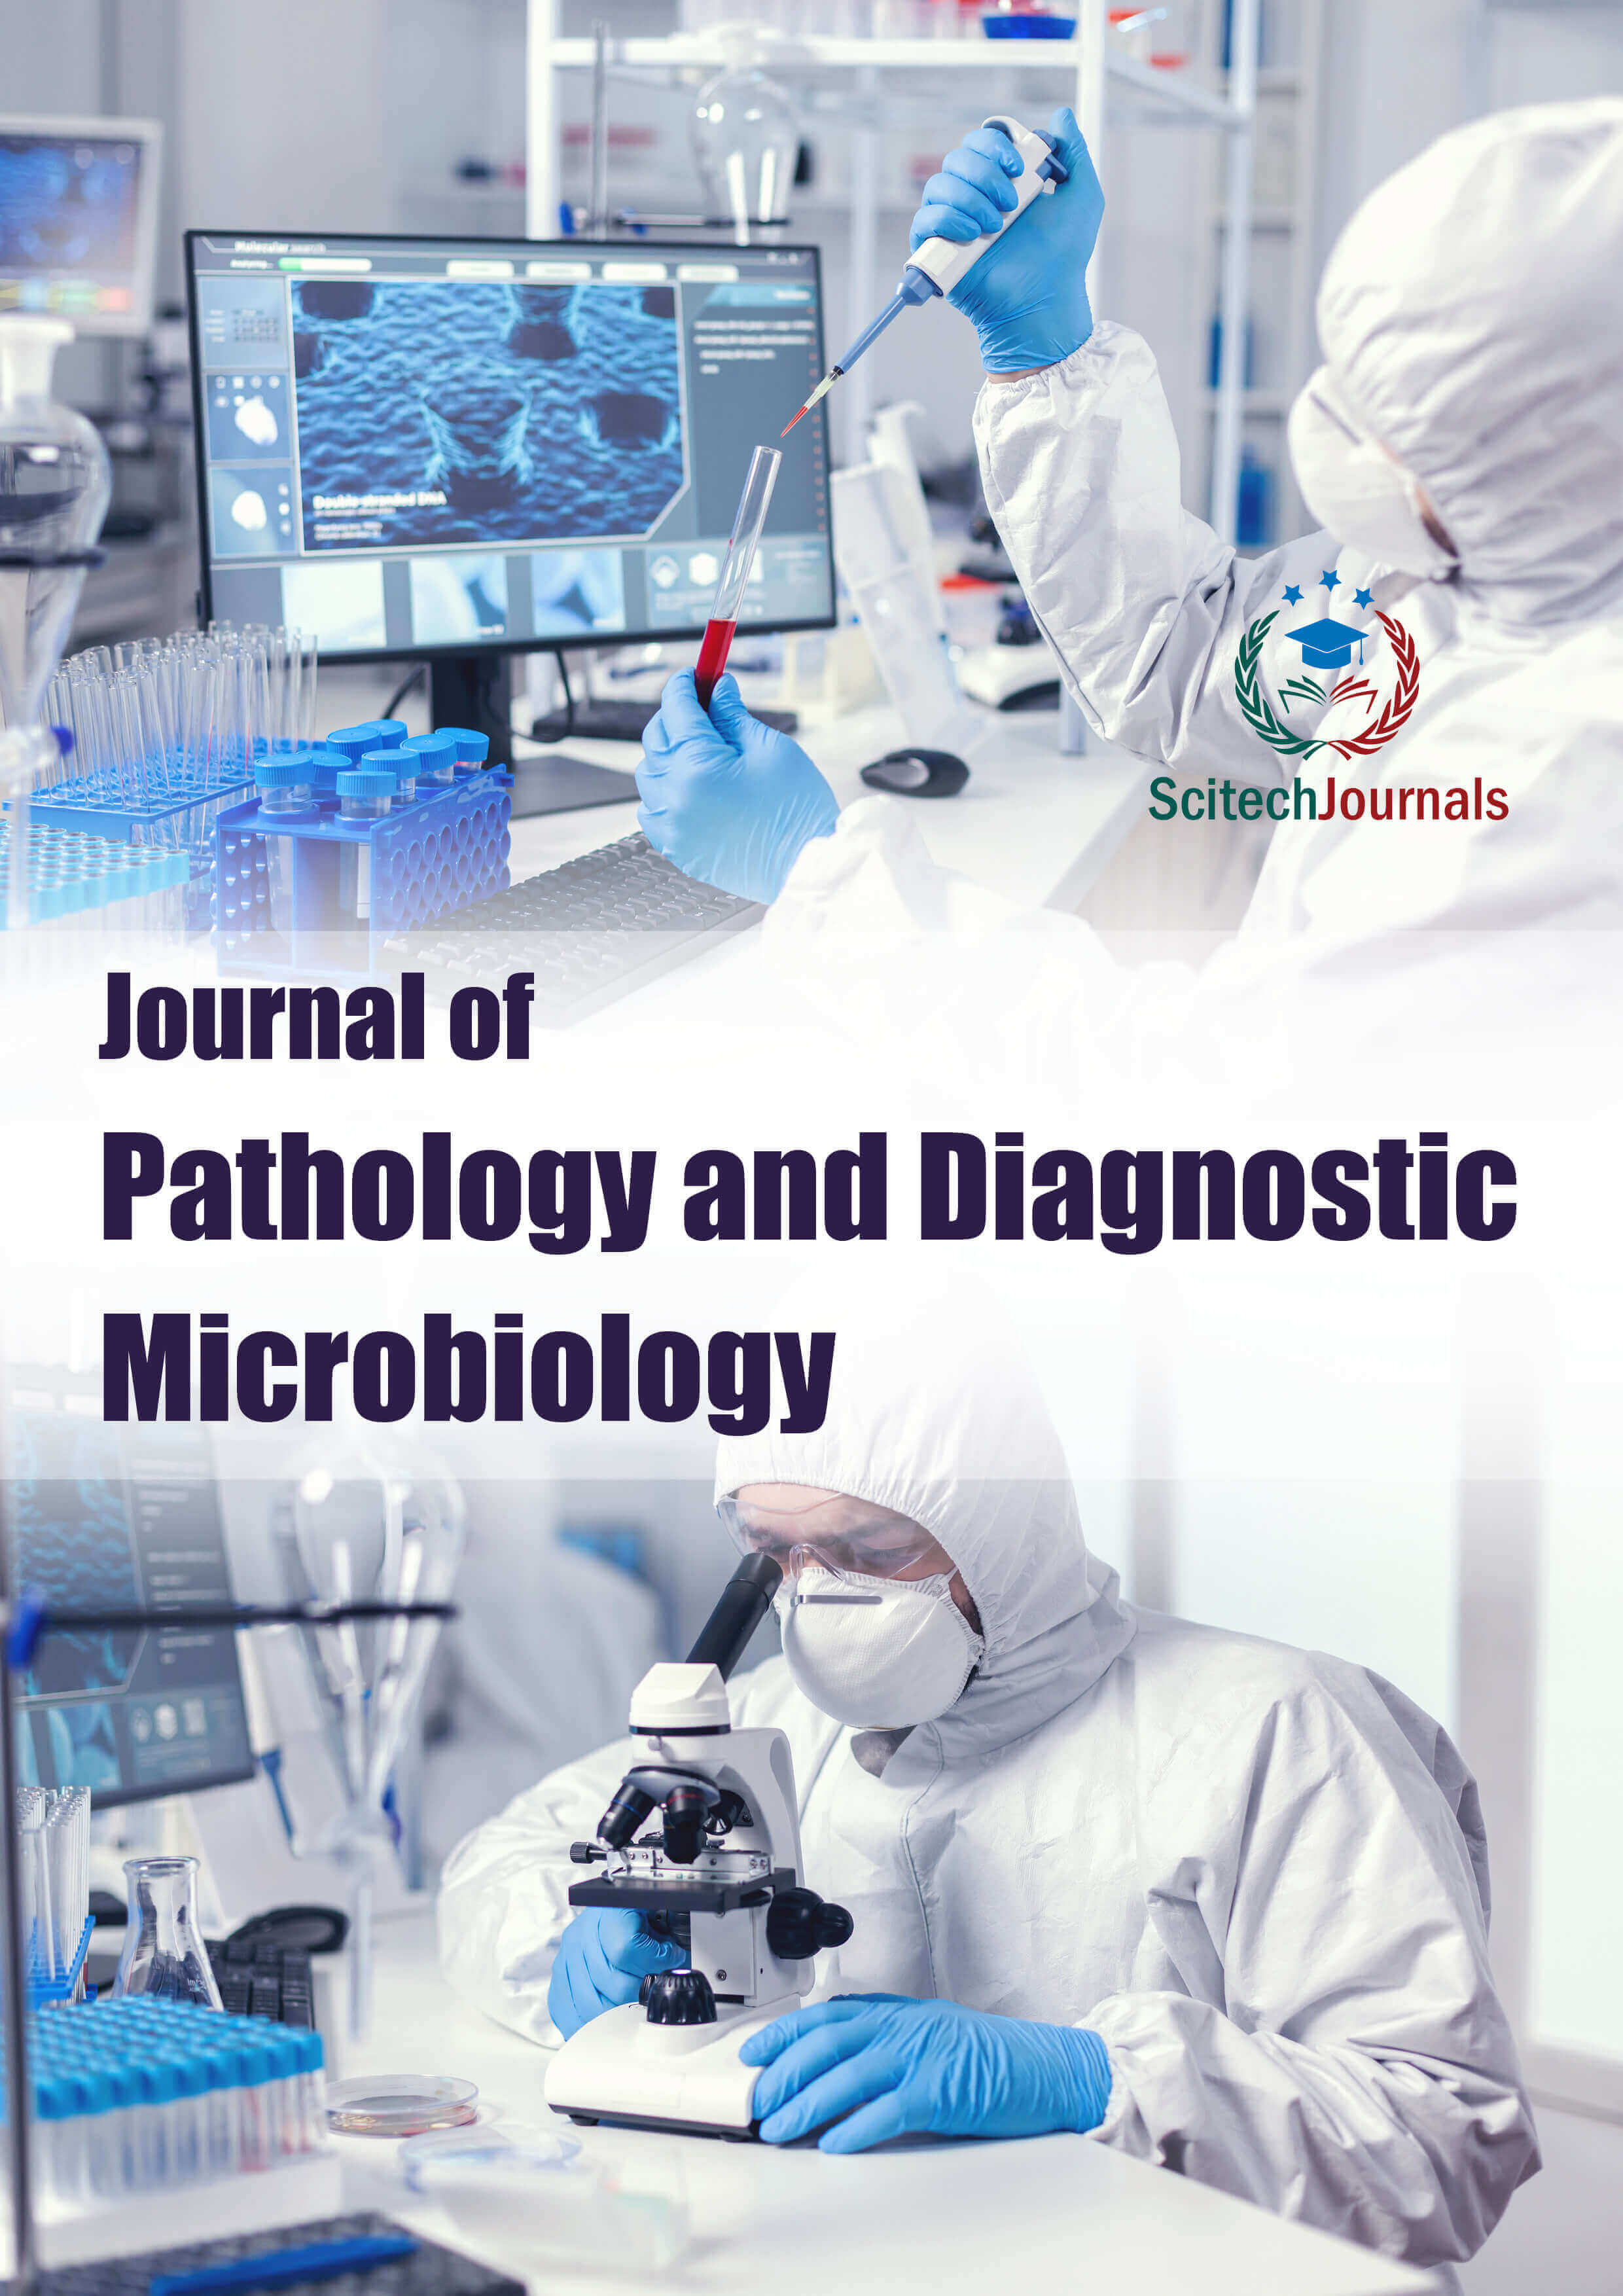 Journal of Pathology and Diagnostic Microbiology